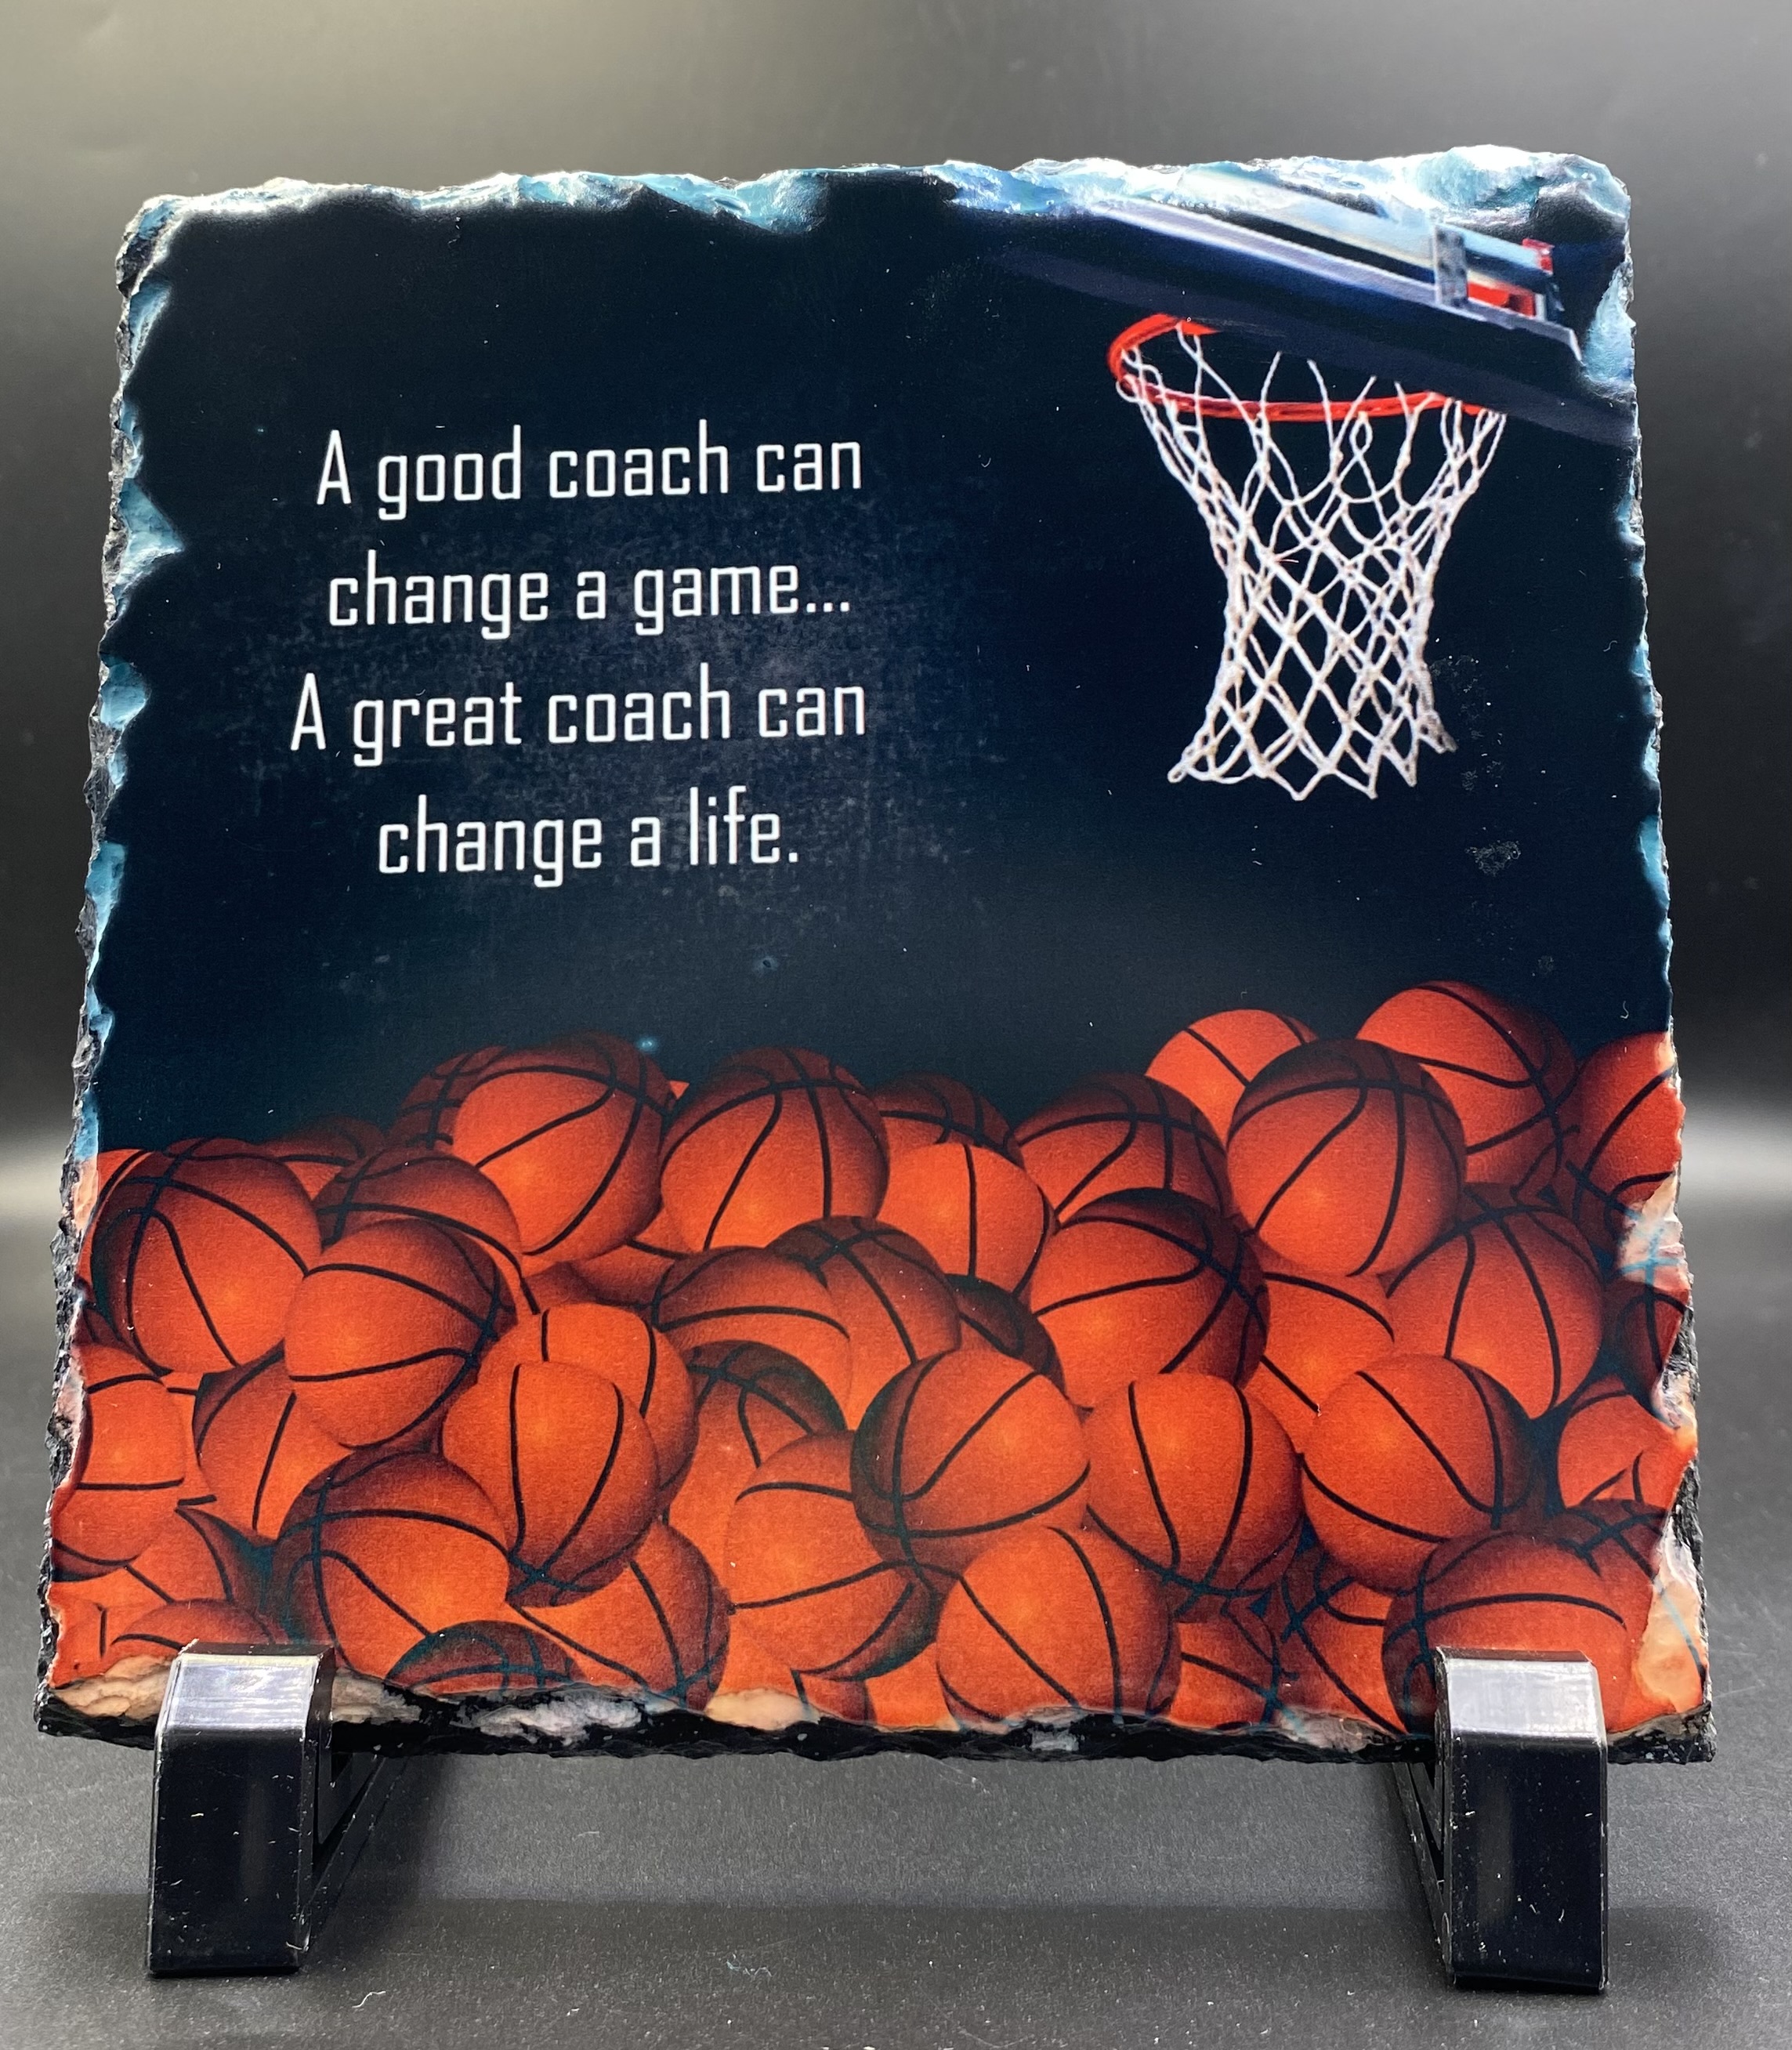 School Basketball team - Coach plaque made with sublimation printing